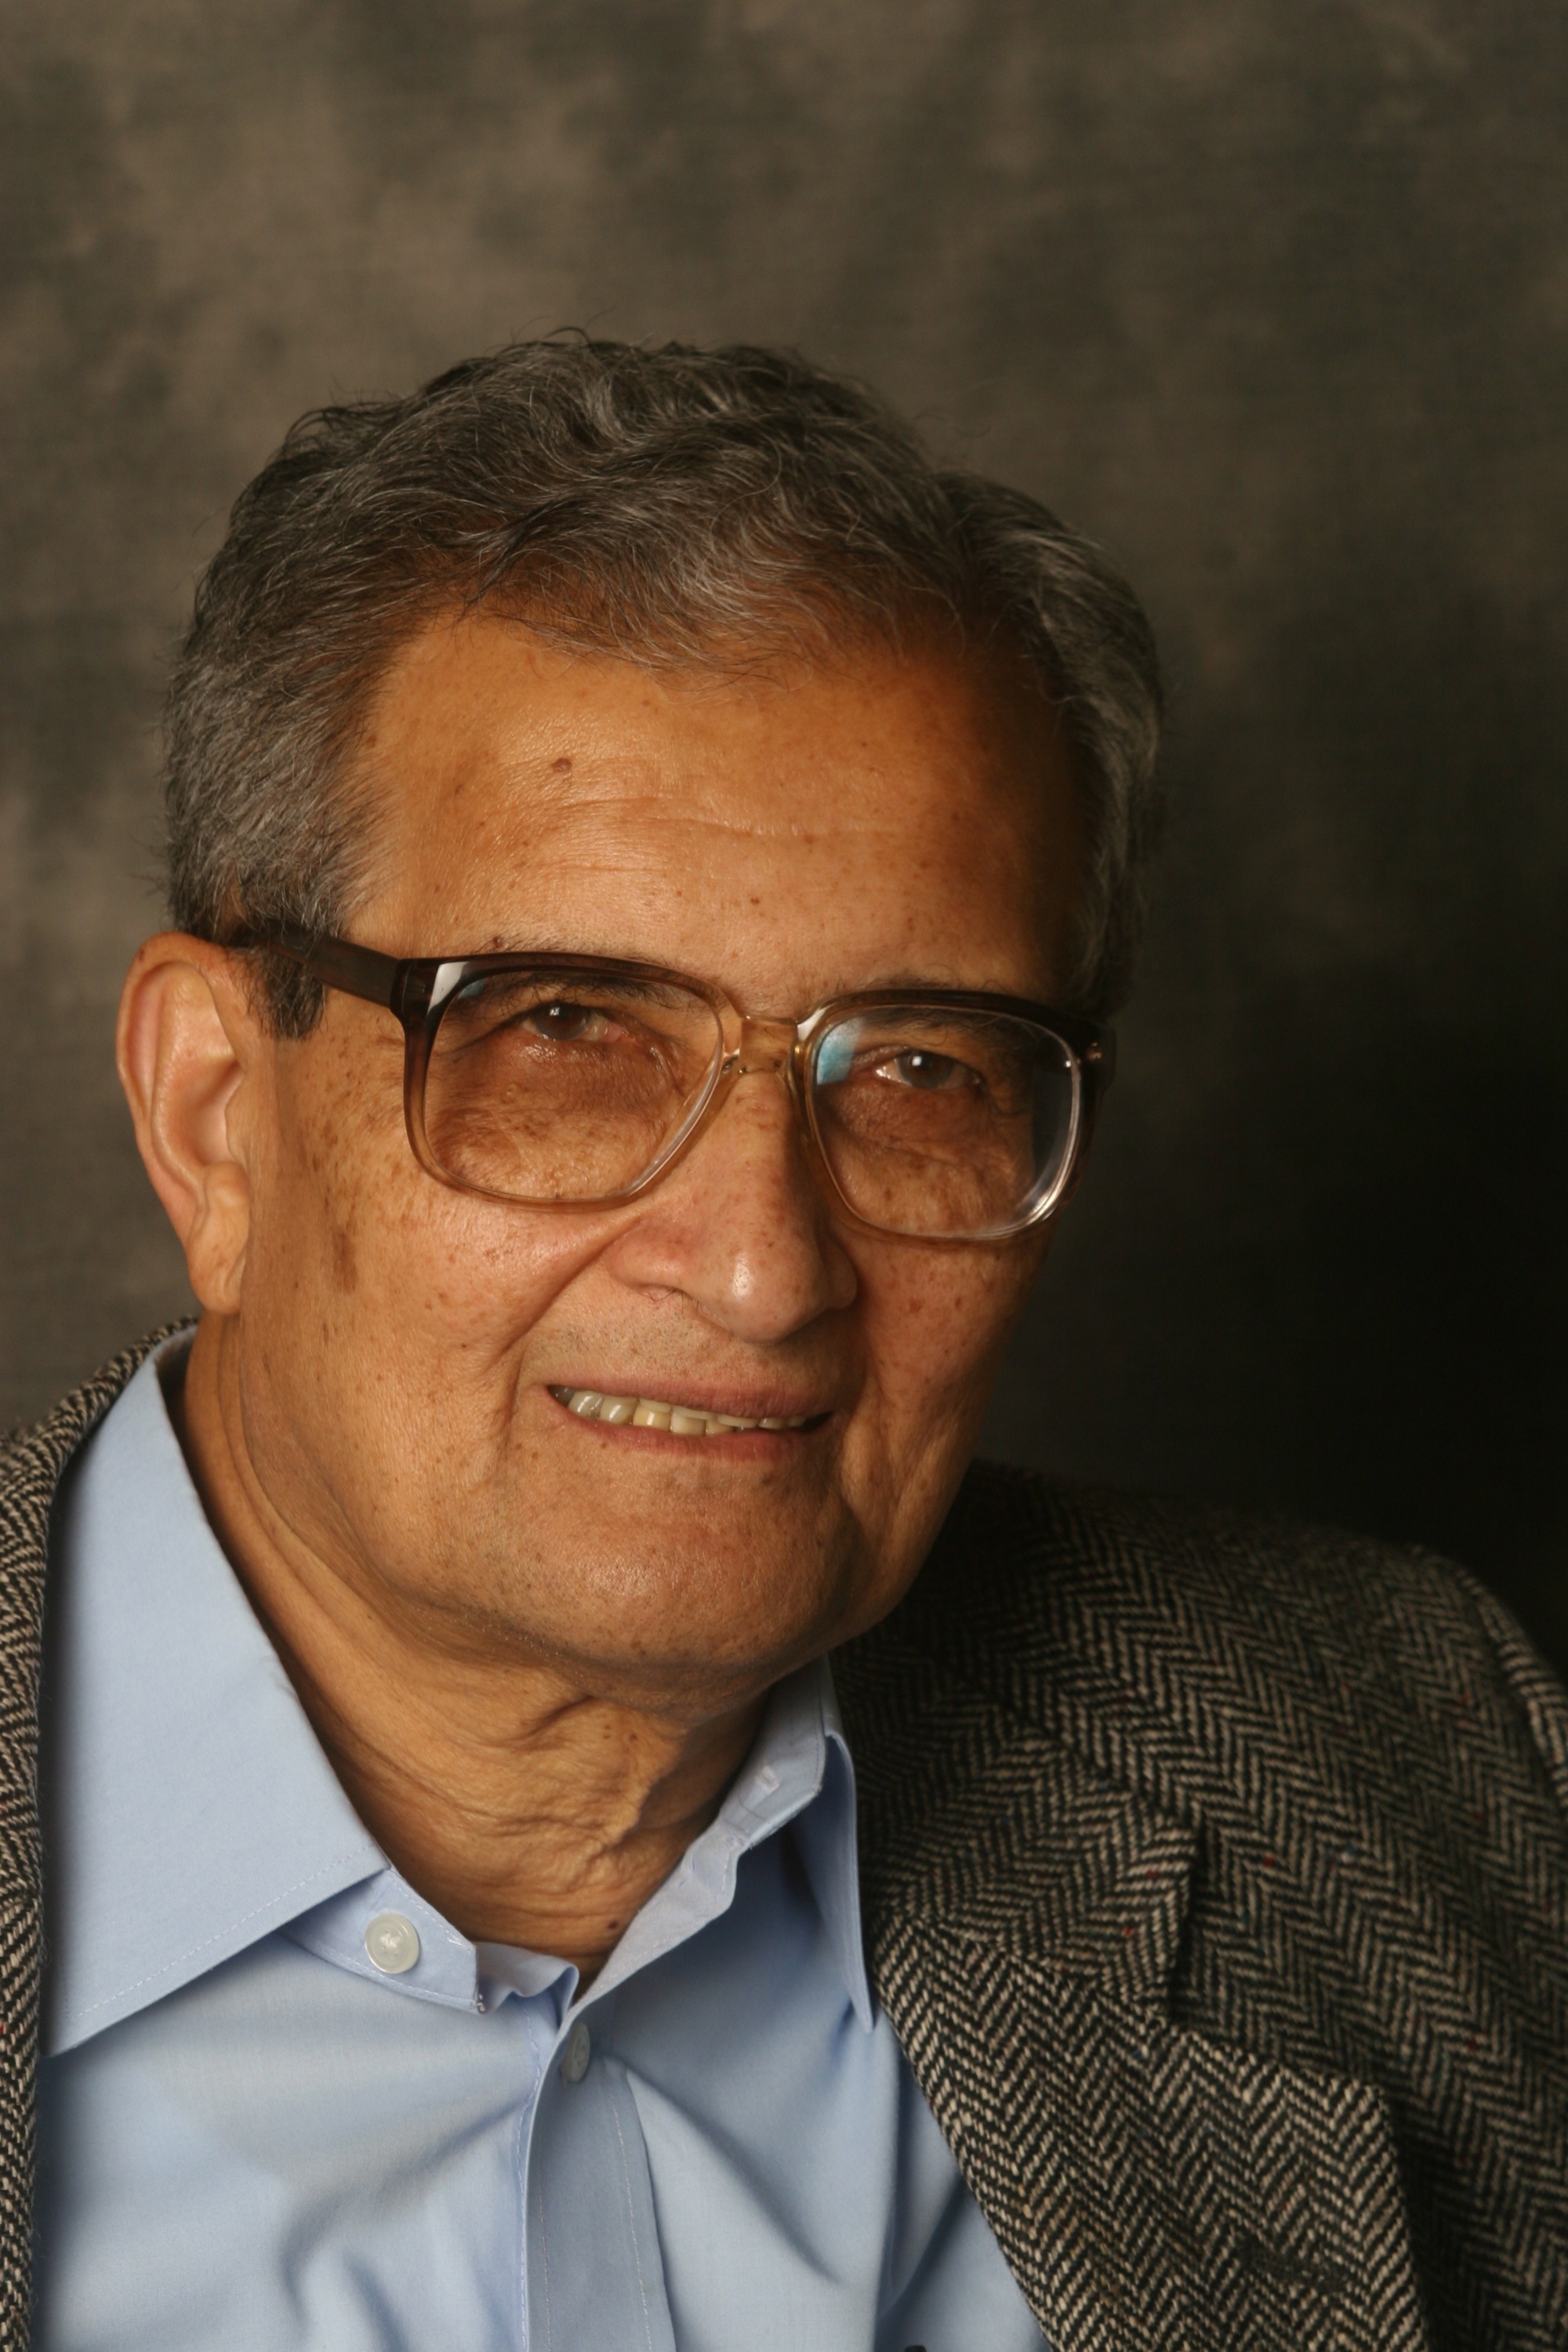 “What Exactly Are Human Rights?” with Amartya Sen March 8, 2014 | Cary ...